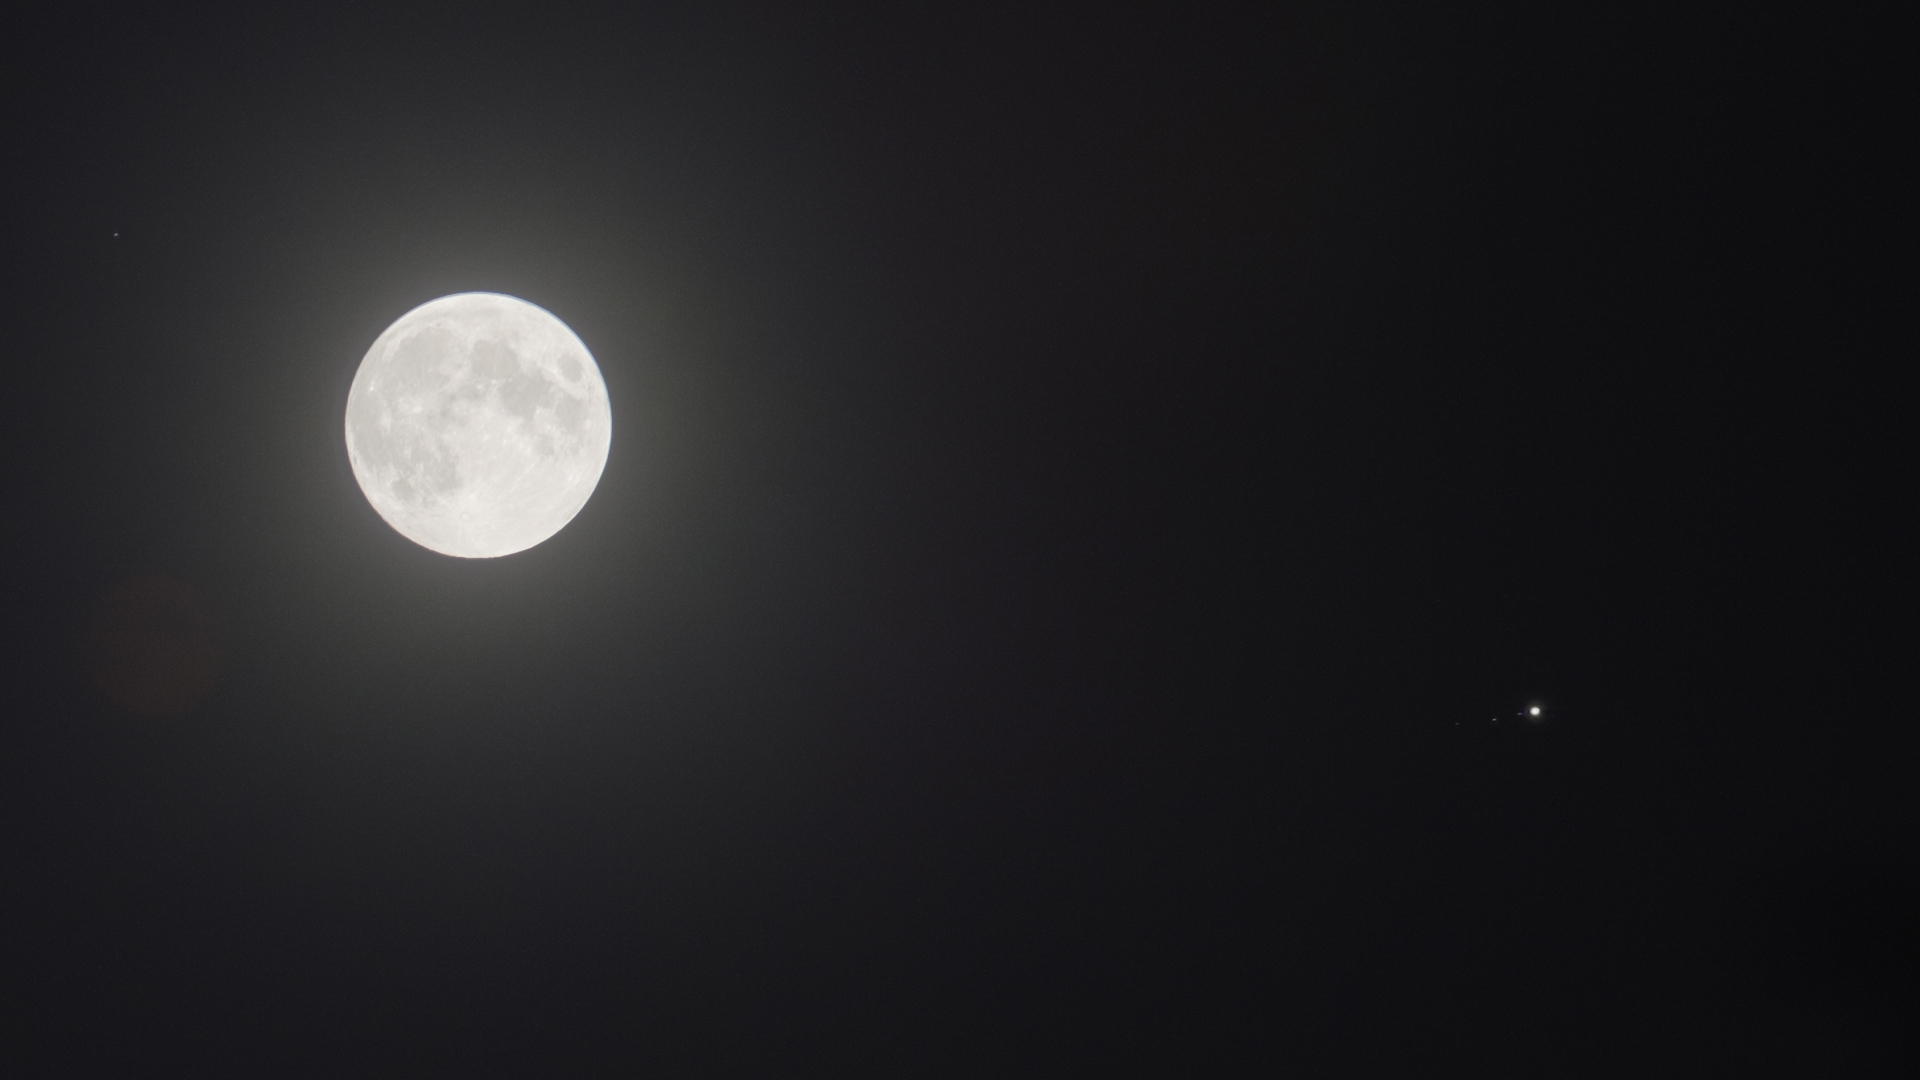 Moon and Jupiter with Callisto, Ganymede, Io (2019:06:16 22:12:30 UT, Canon EOS 6D, 5s, f/6.3, f=200mm, ISO 100)